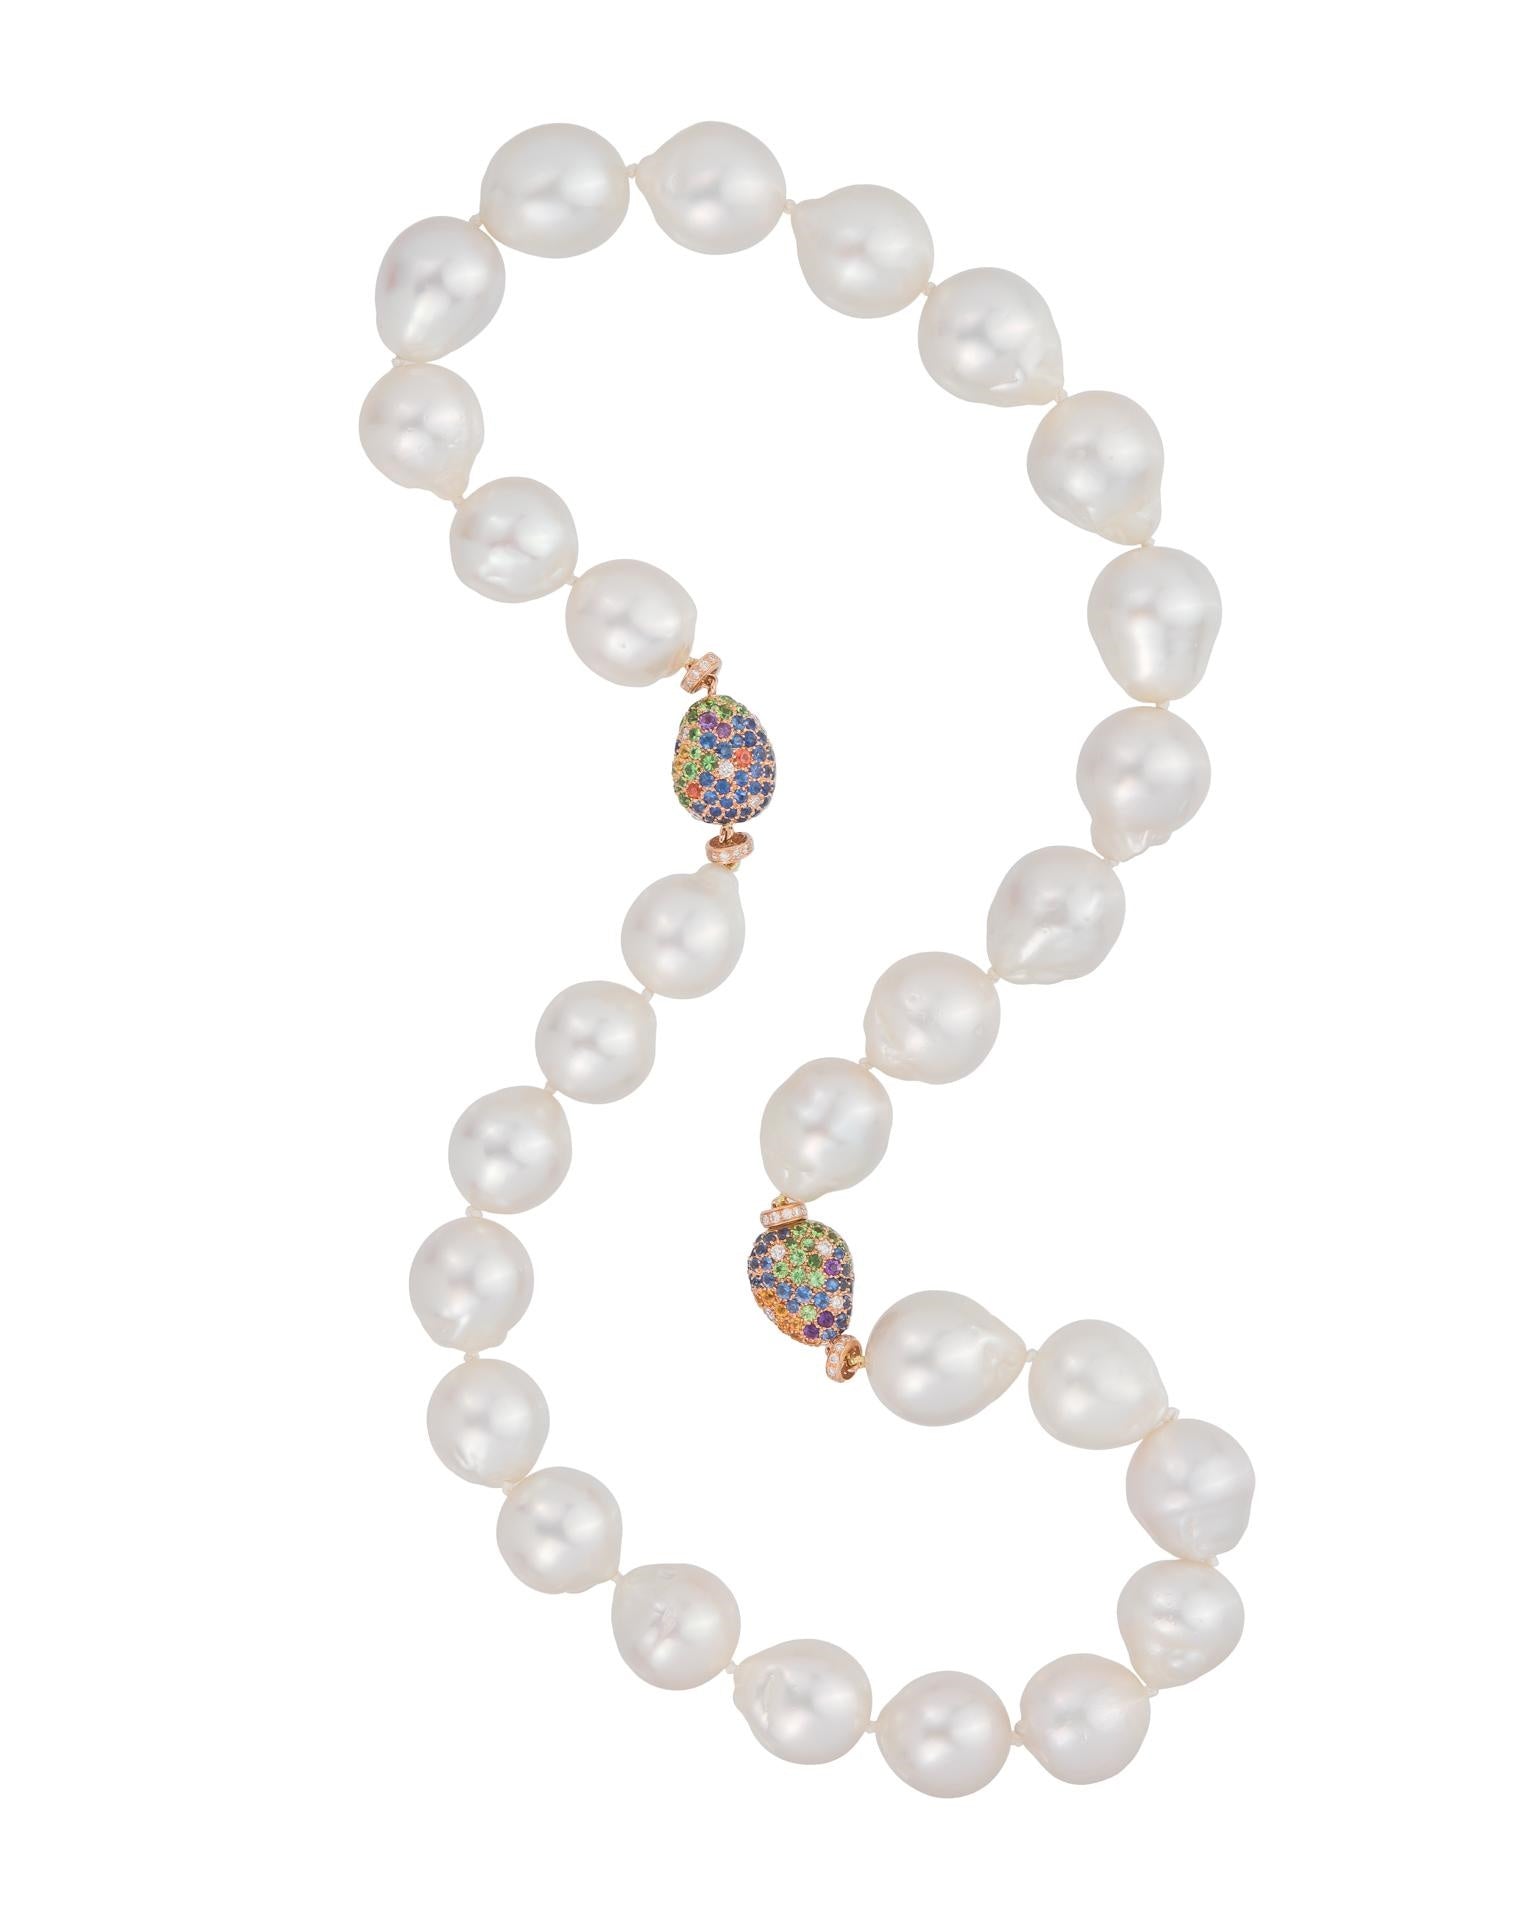 South Sea pearl and 'rainbow' gold 'pebble' necklace, crafted in 18 karat rose gold.